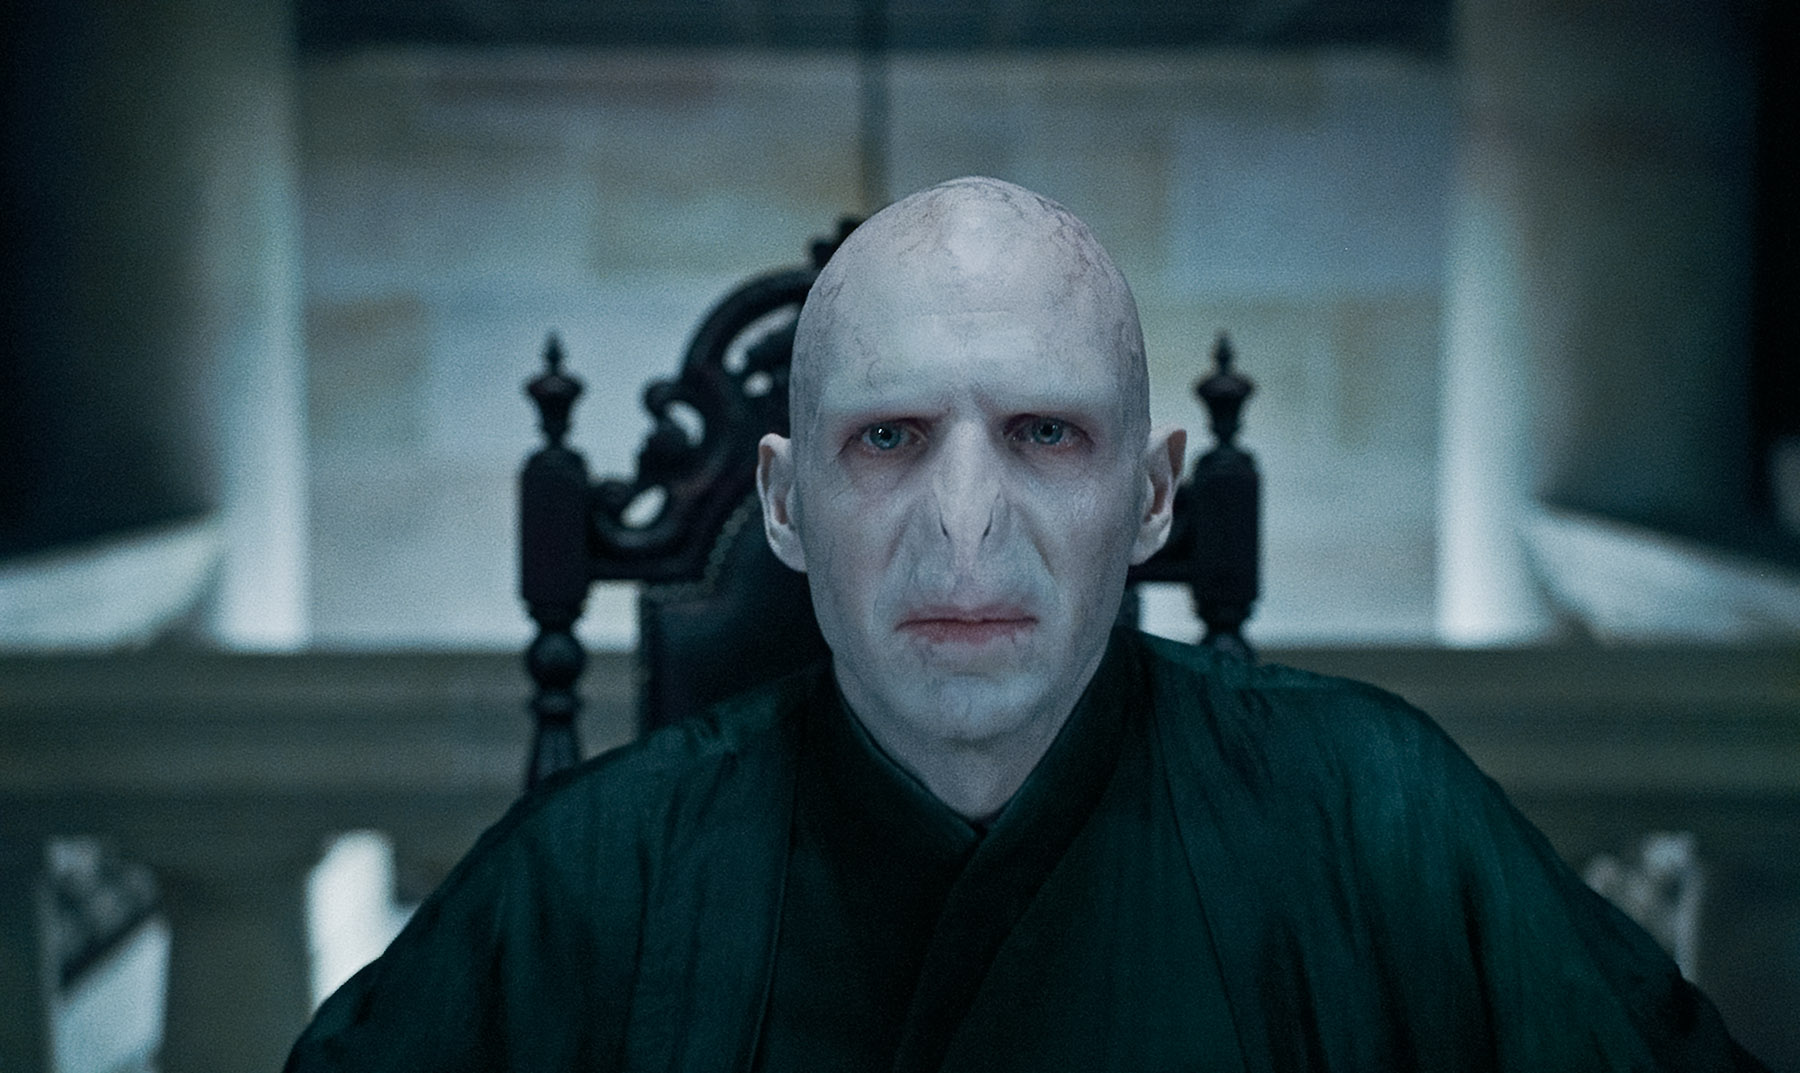 Lord Voldemort From Harry Potter Deathly Hallows Wallpaper Click